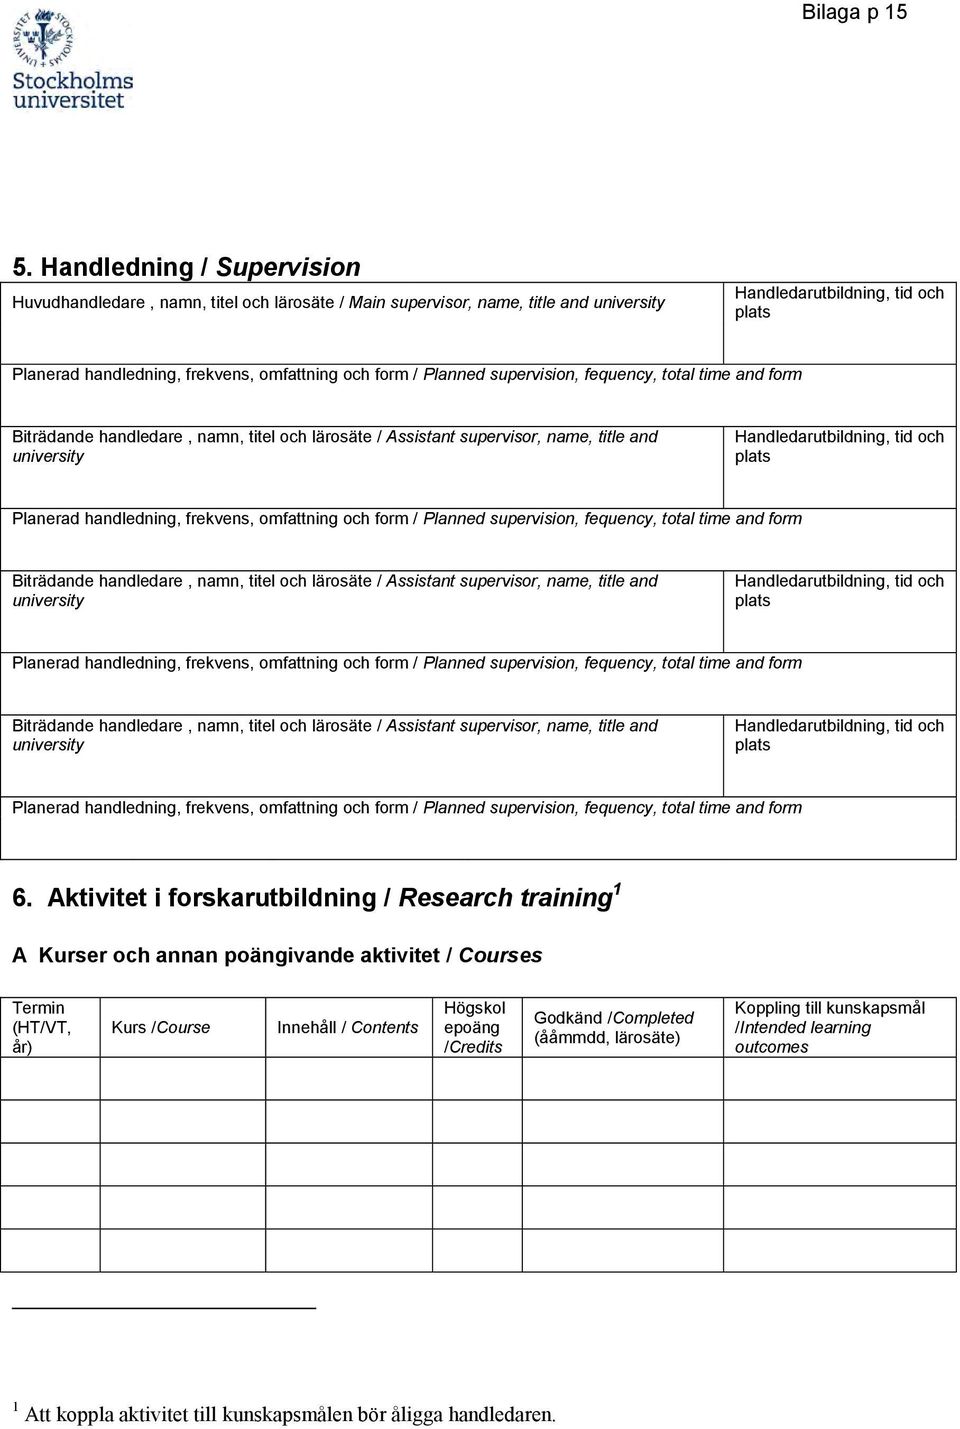 Planerad handledning, frekvens, omfattning och  Planerad handledning, frekvens, omfattning och  Planerad handledning, frekvens, omfattning och form / Planned supervision, fequency, total time and